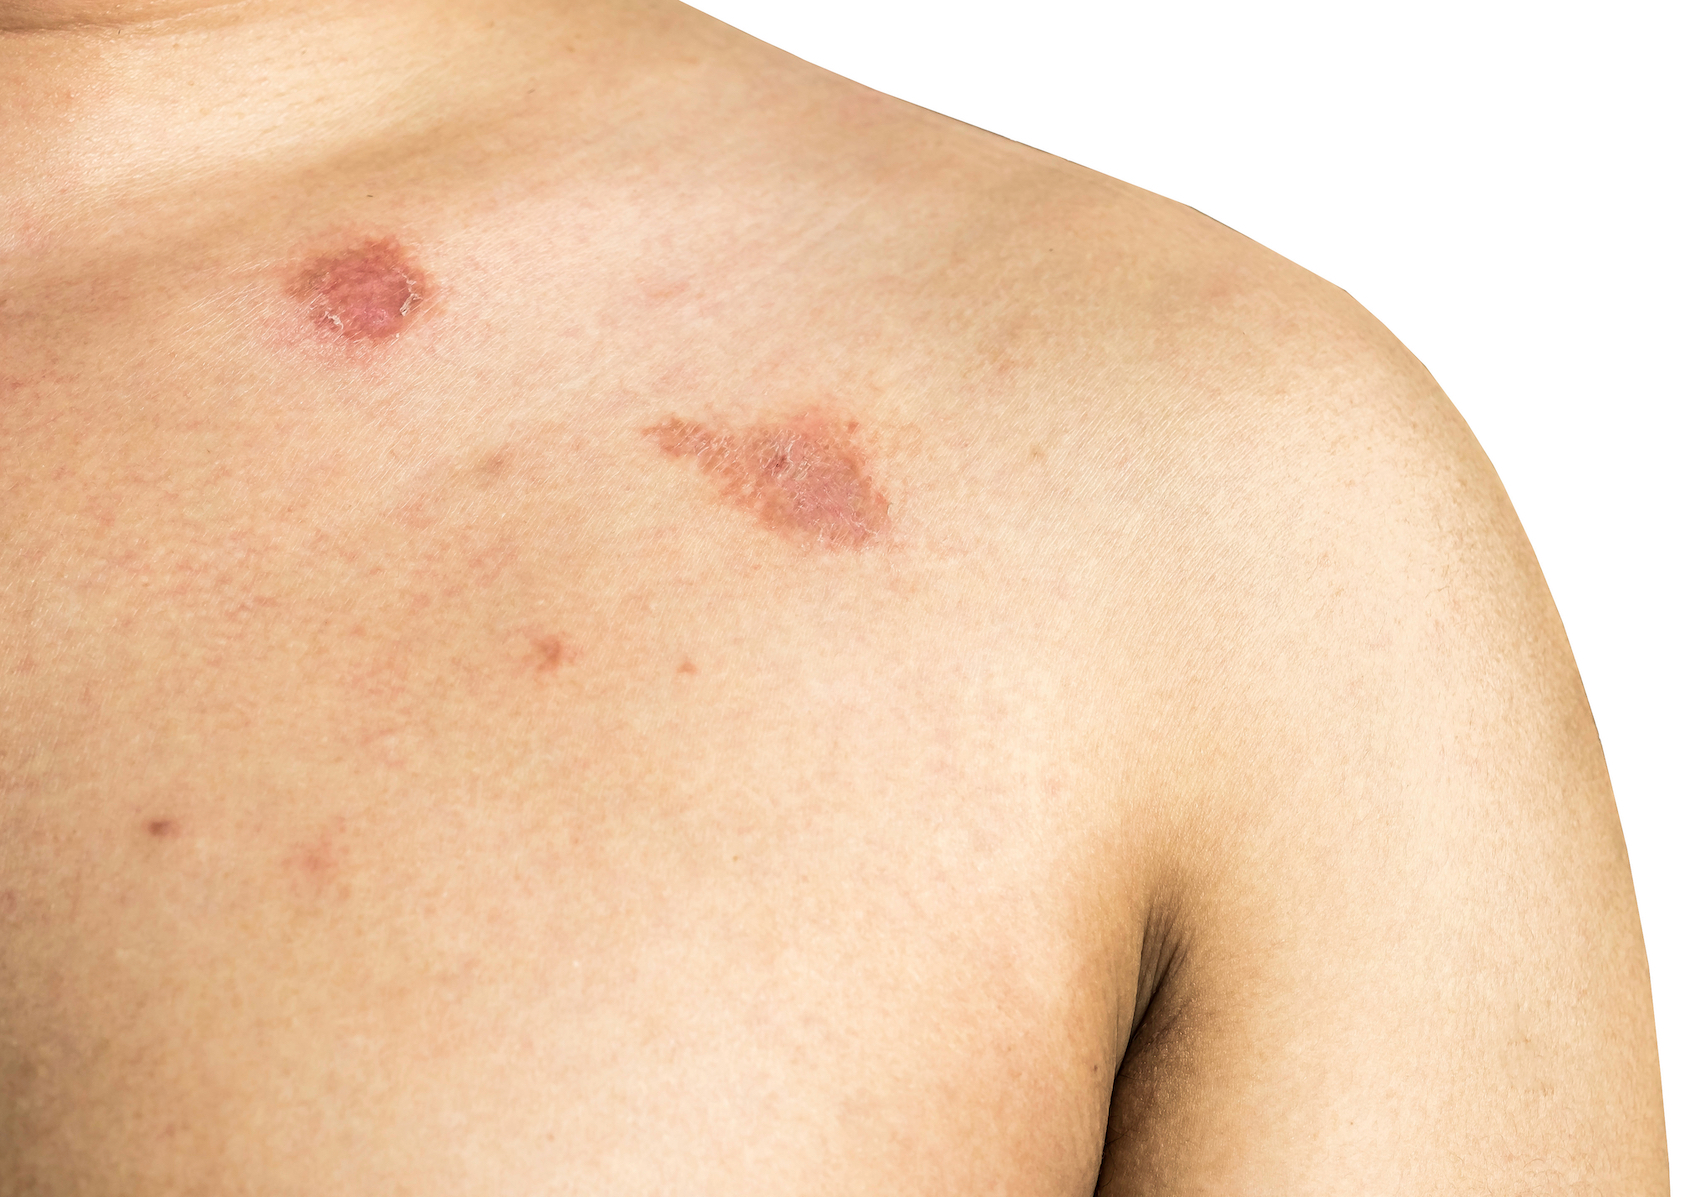 Ringworm on the body. It is caused by a fungus isolated on white background.